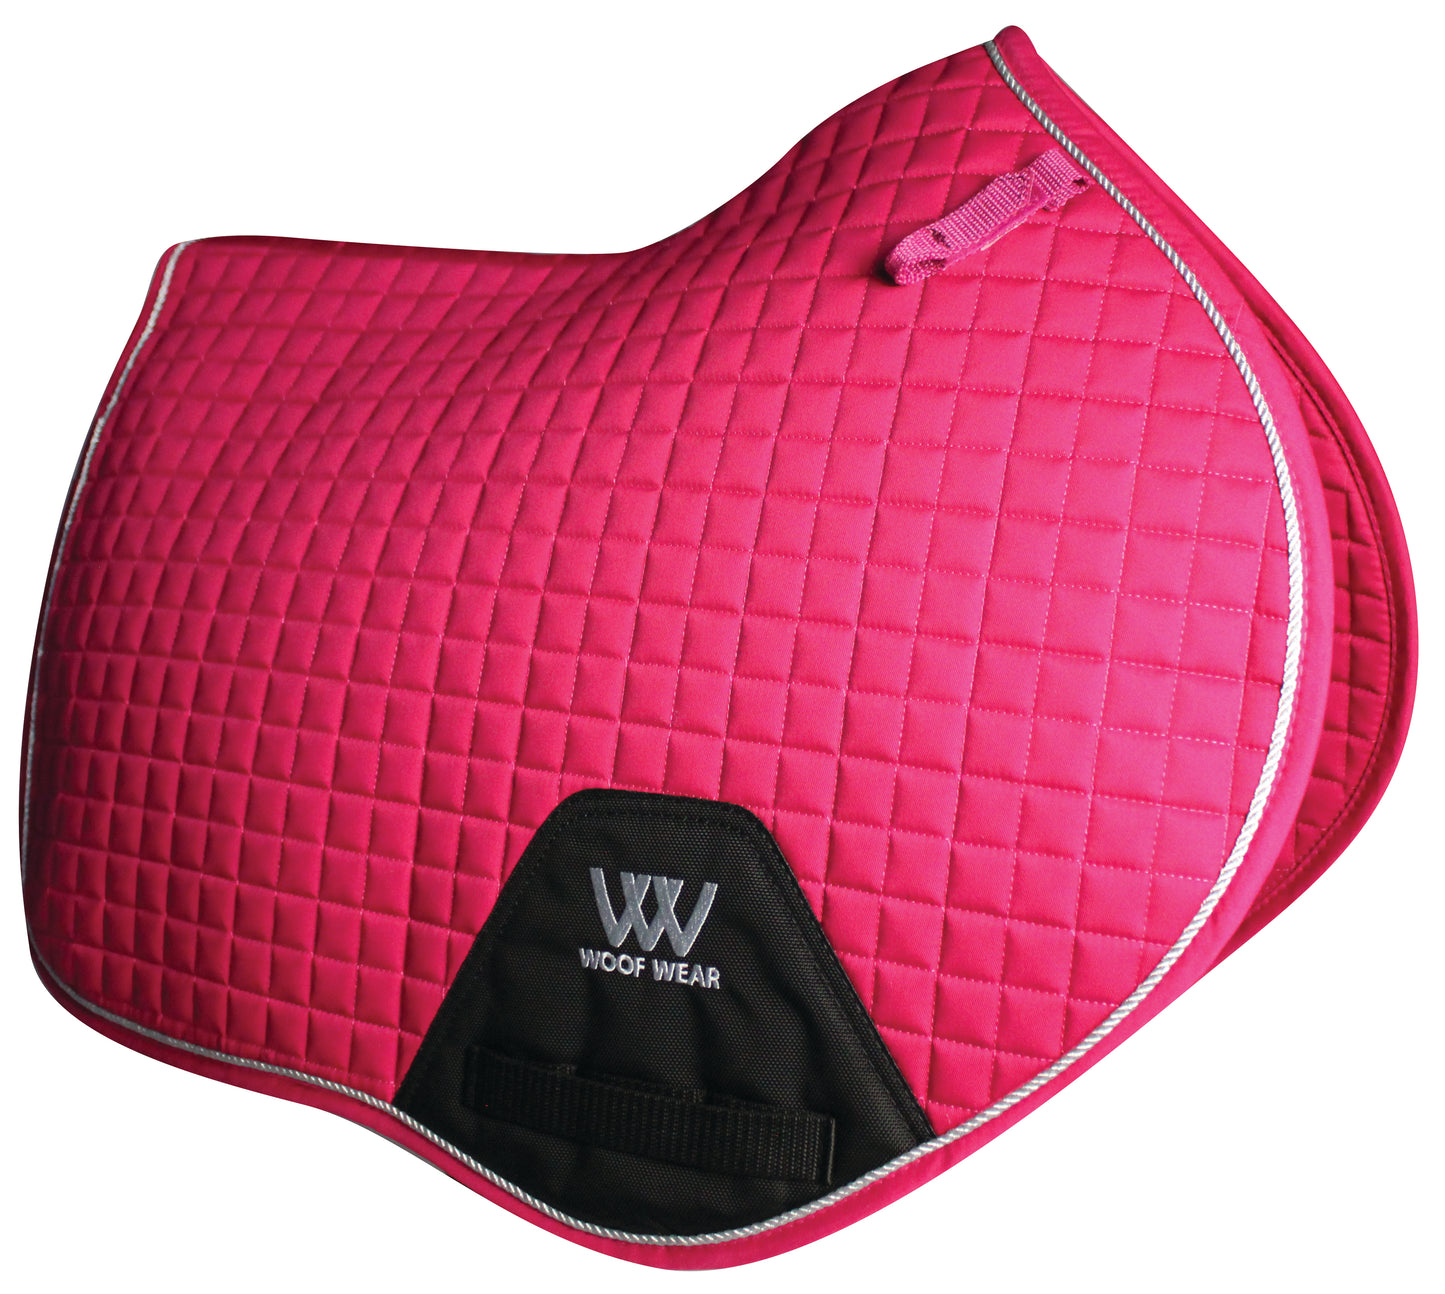 Woof Wear Close Contact Saddle Cloth - Top Of The Clops